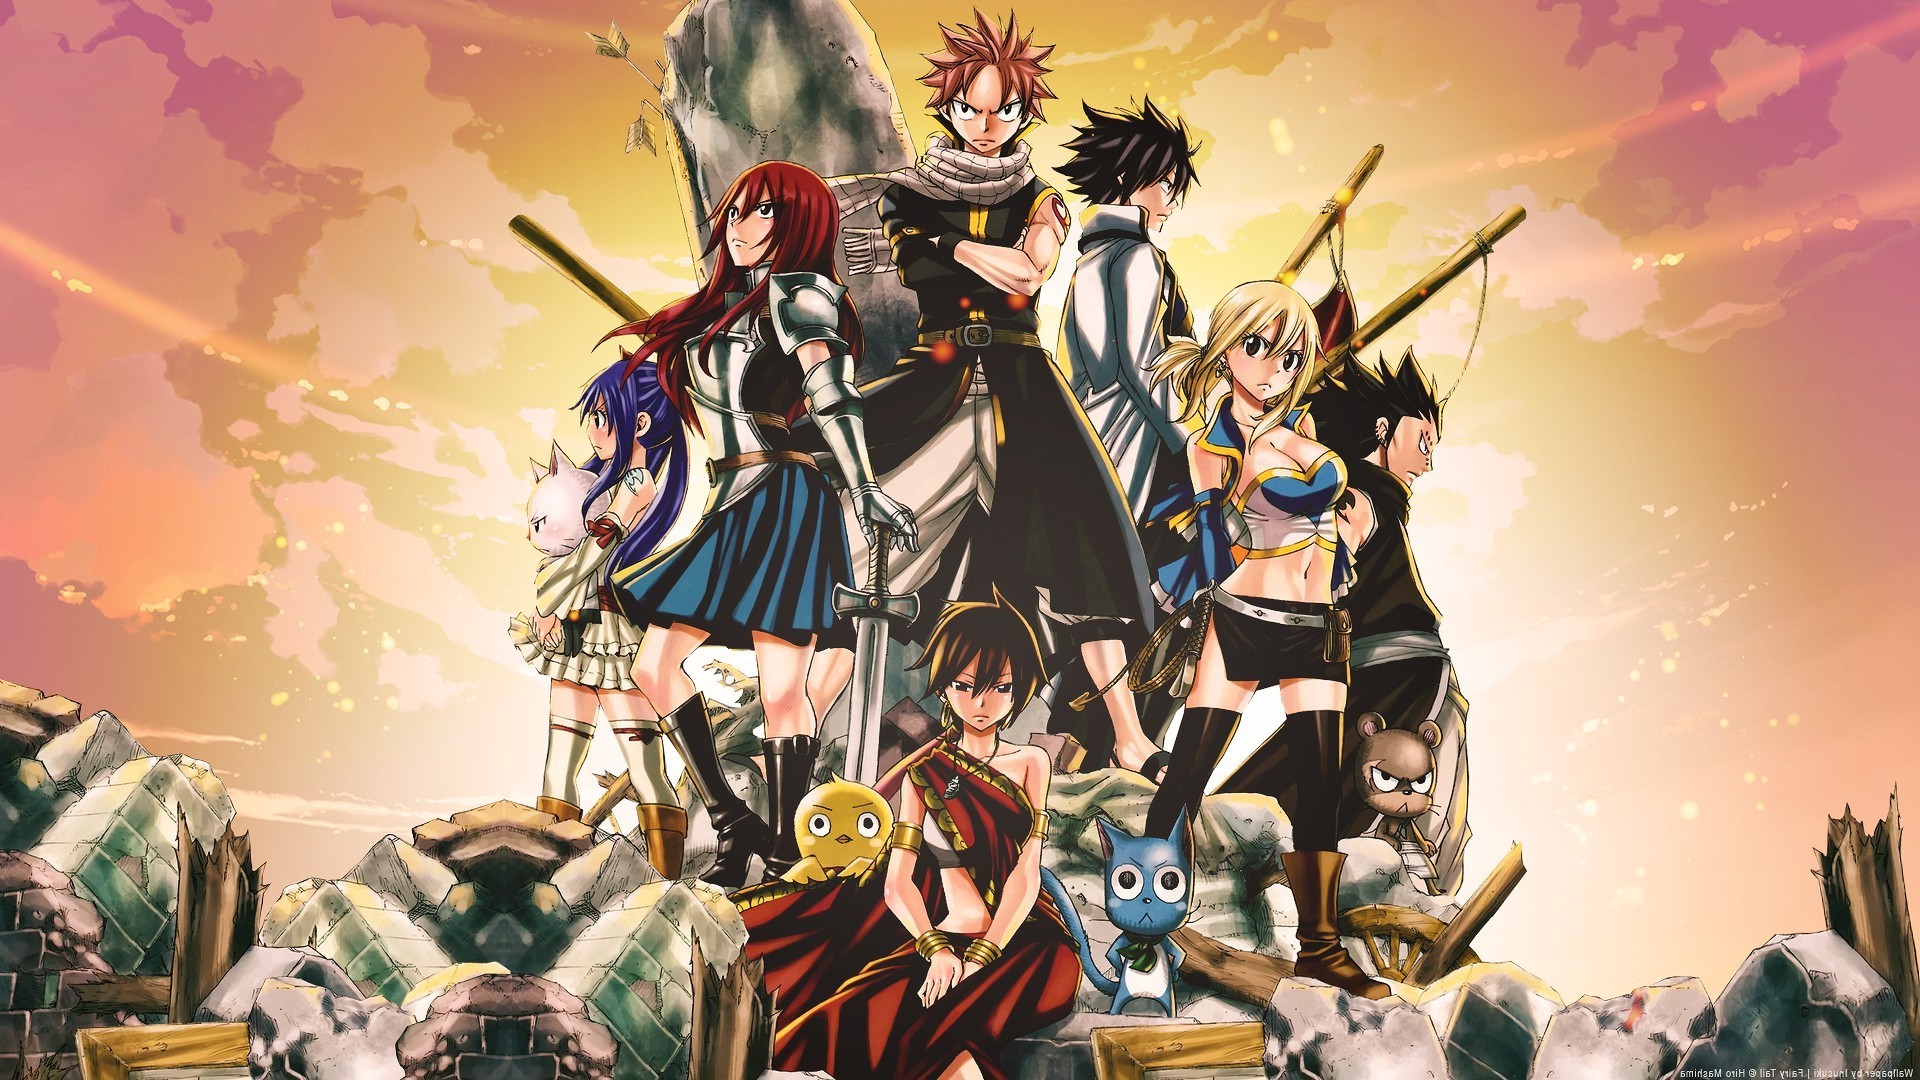 Anime, Fairy Tail, Scarlet Erza, Fullbuster Gray, Dragneel Natsu, Heartfilia Lucy, Happy Fairy Tail Wallpapers HD / Desktop and Mobile Backgrounds